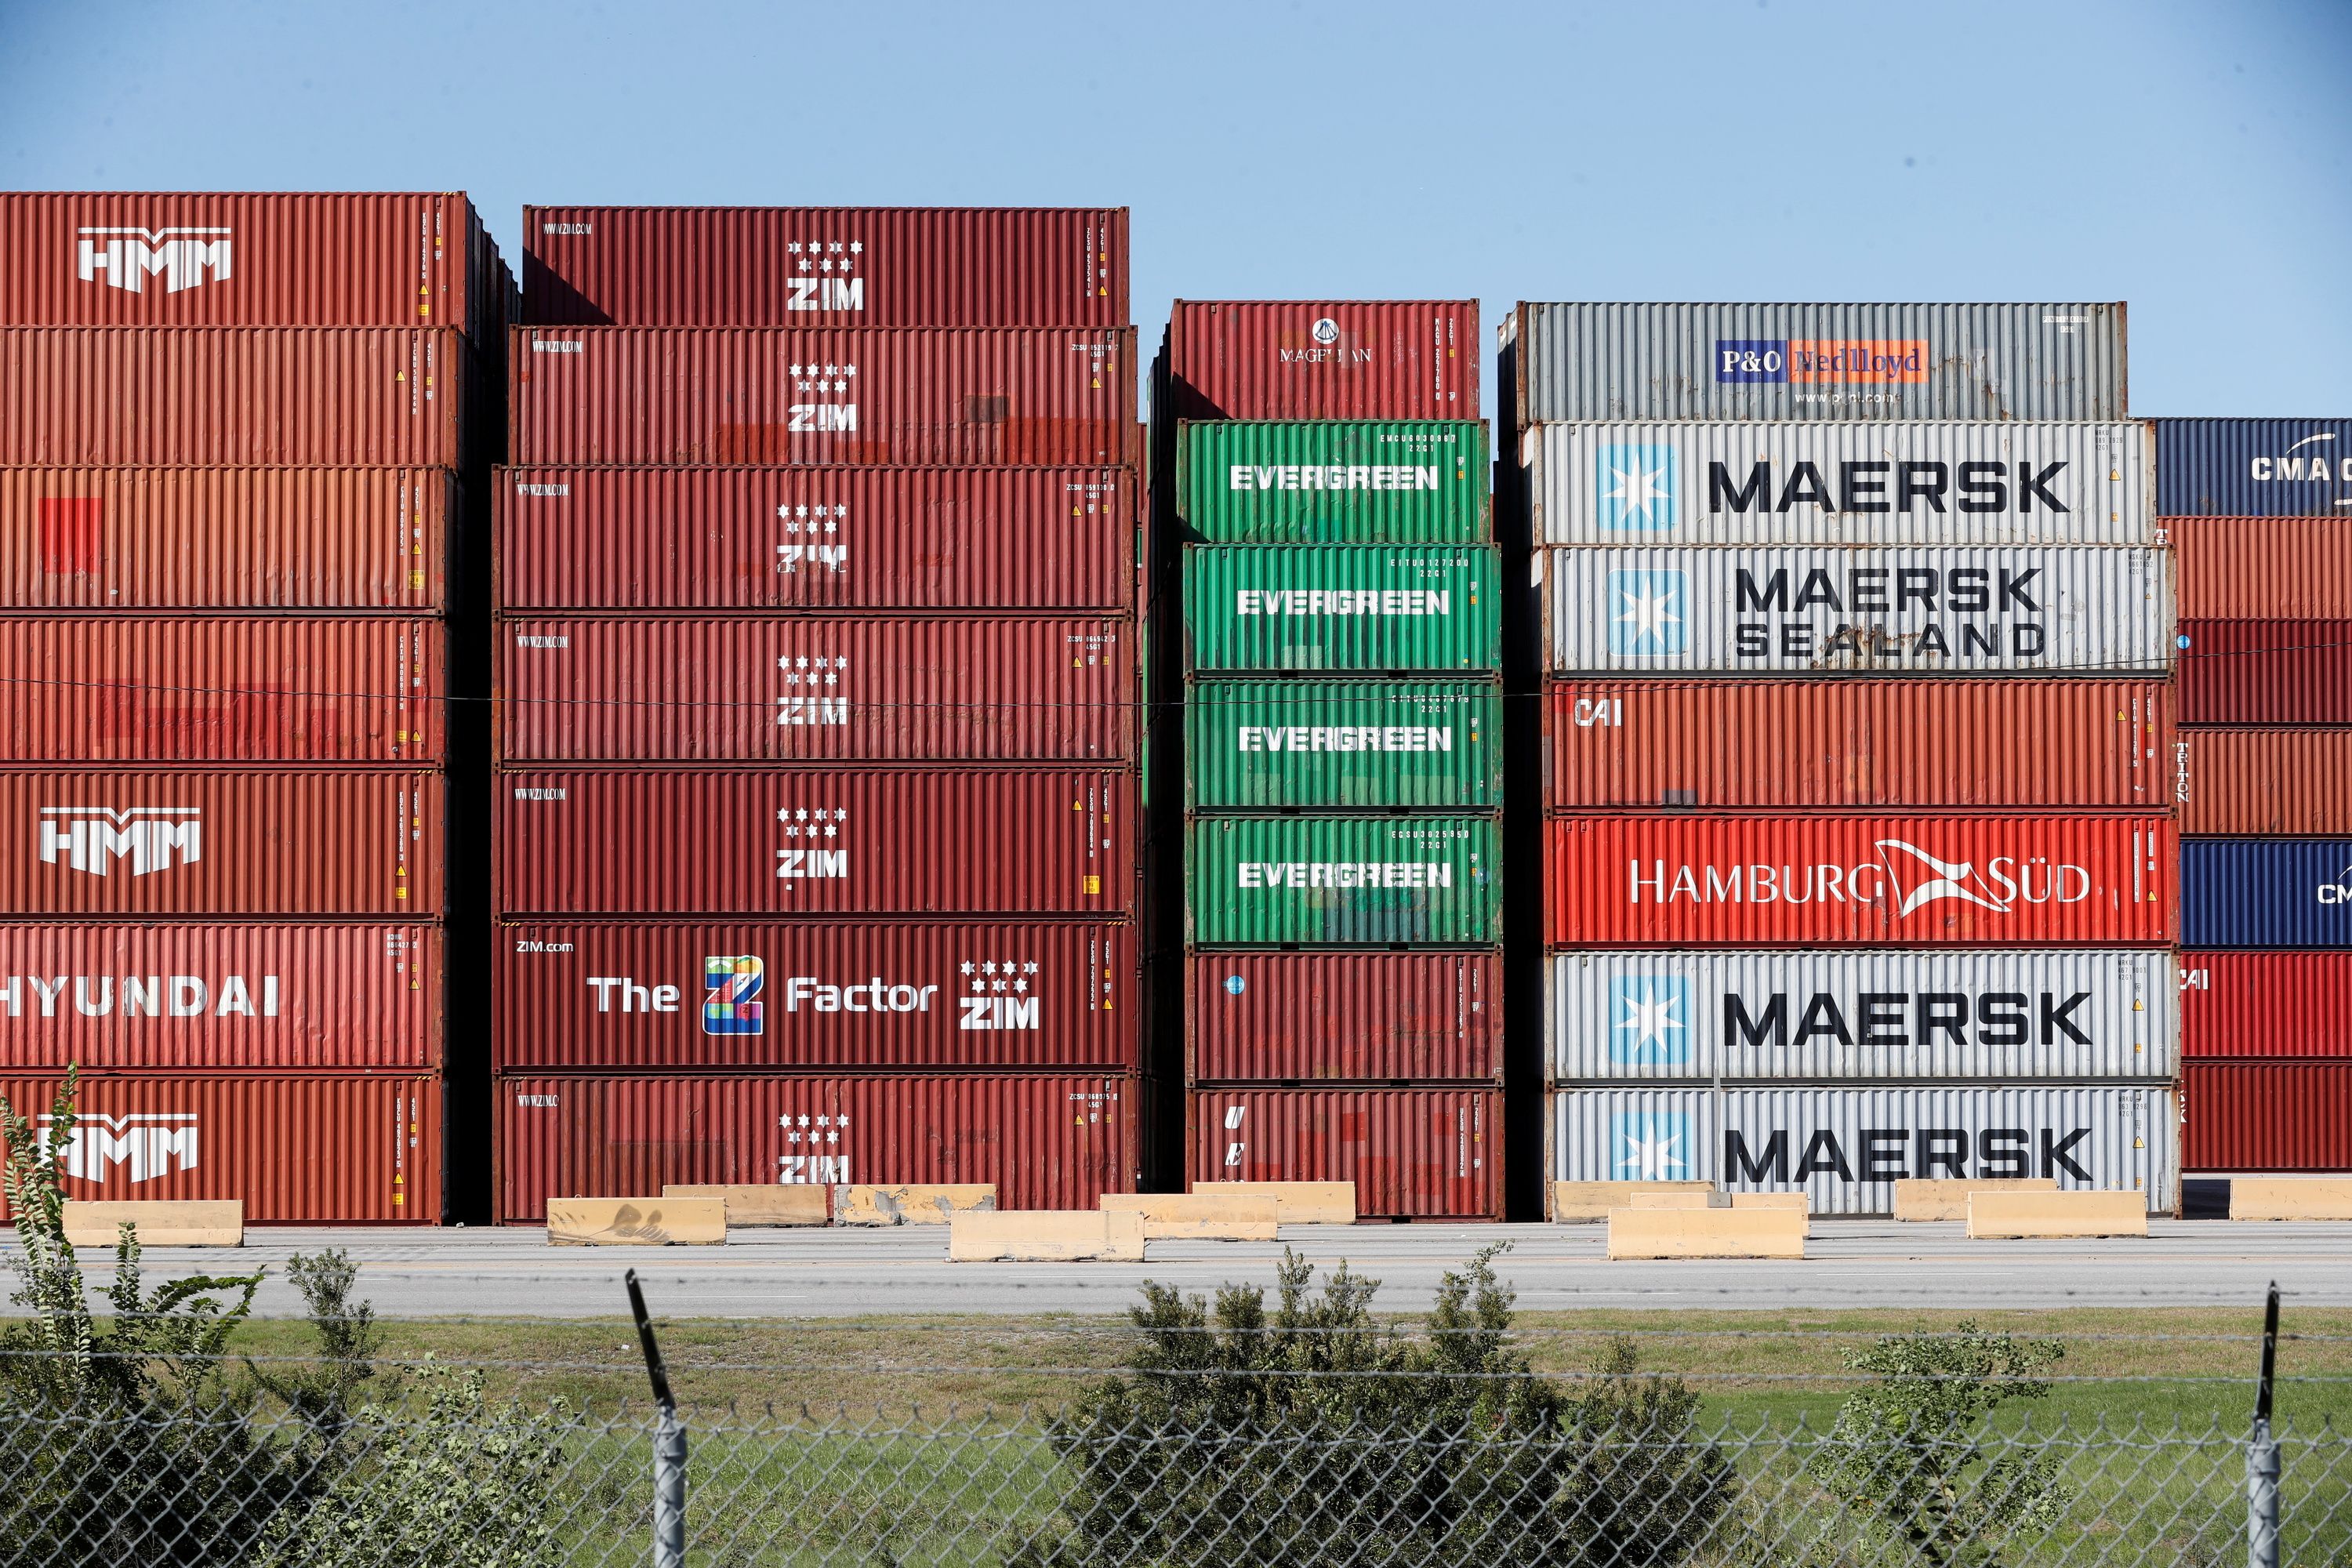 Containers are stored at the Port of Savannah